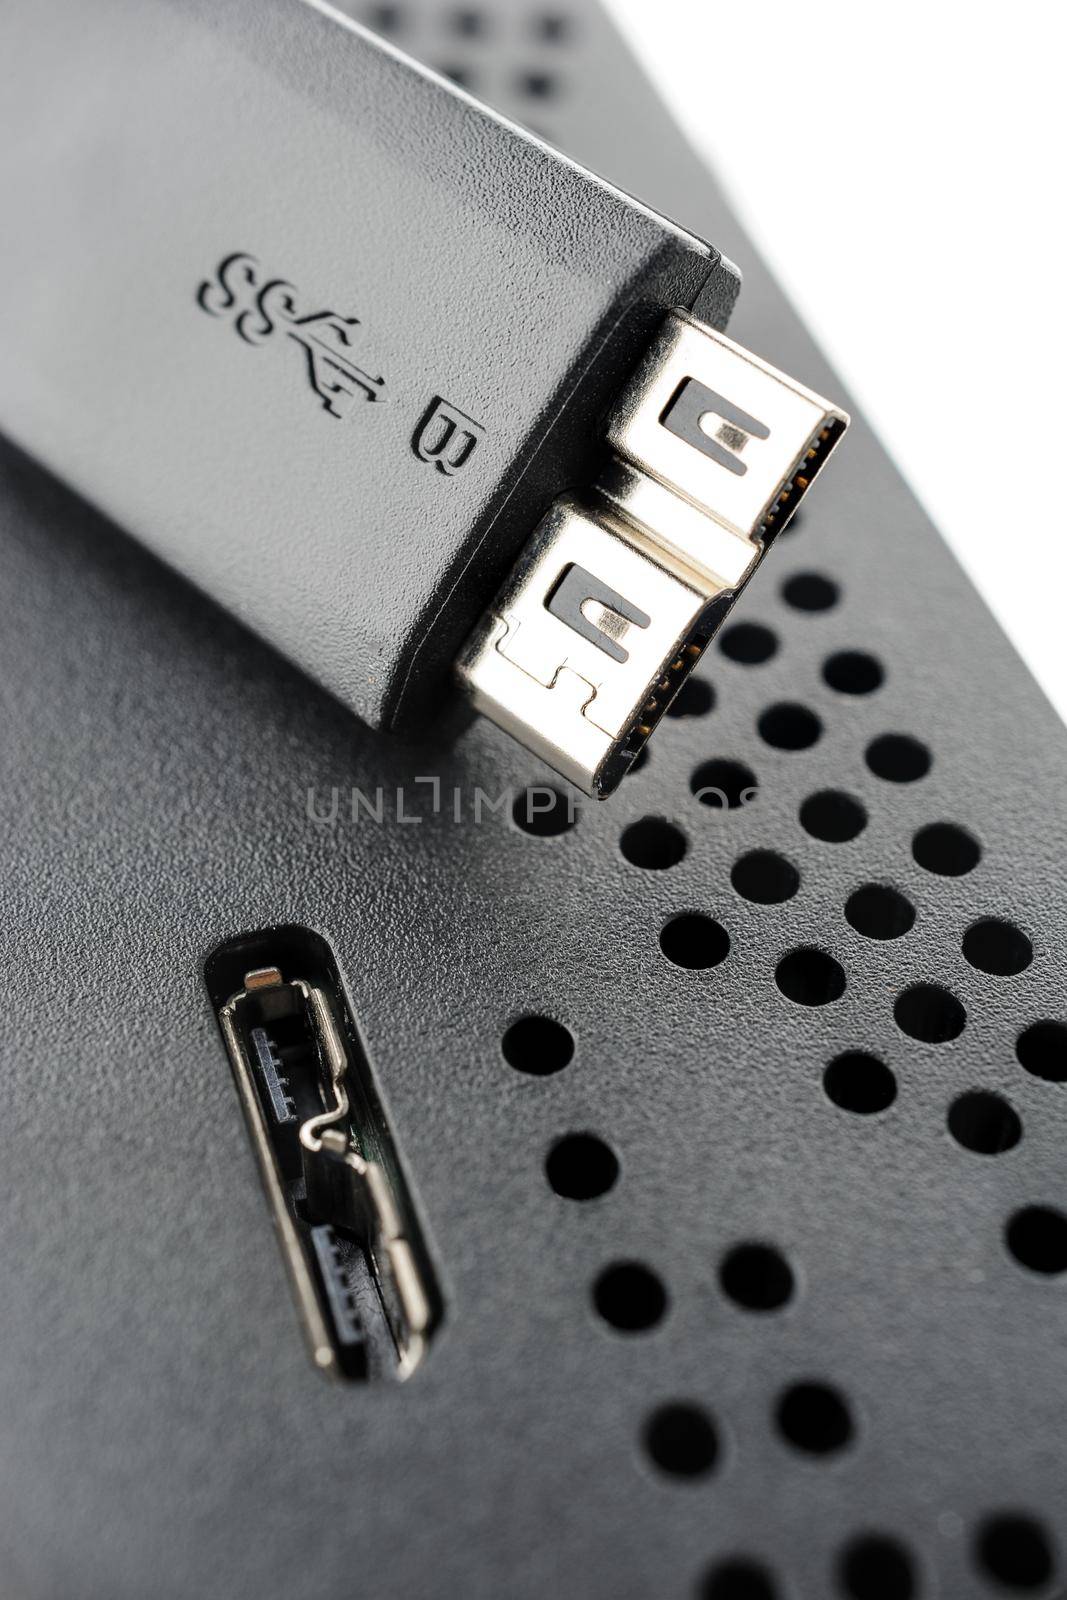 USB 3.0 Cable by norgal